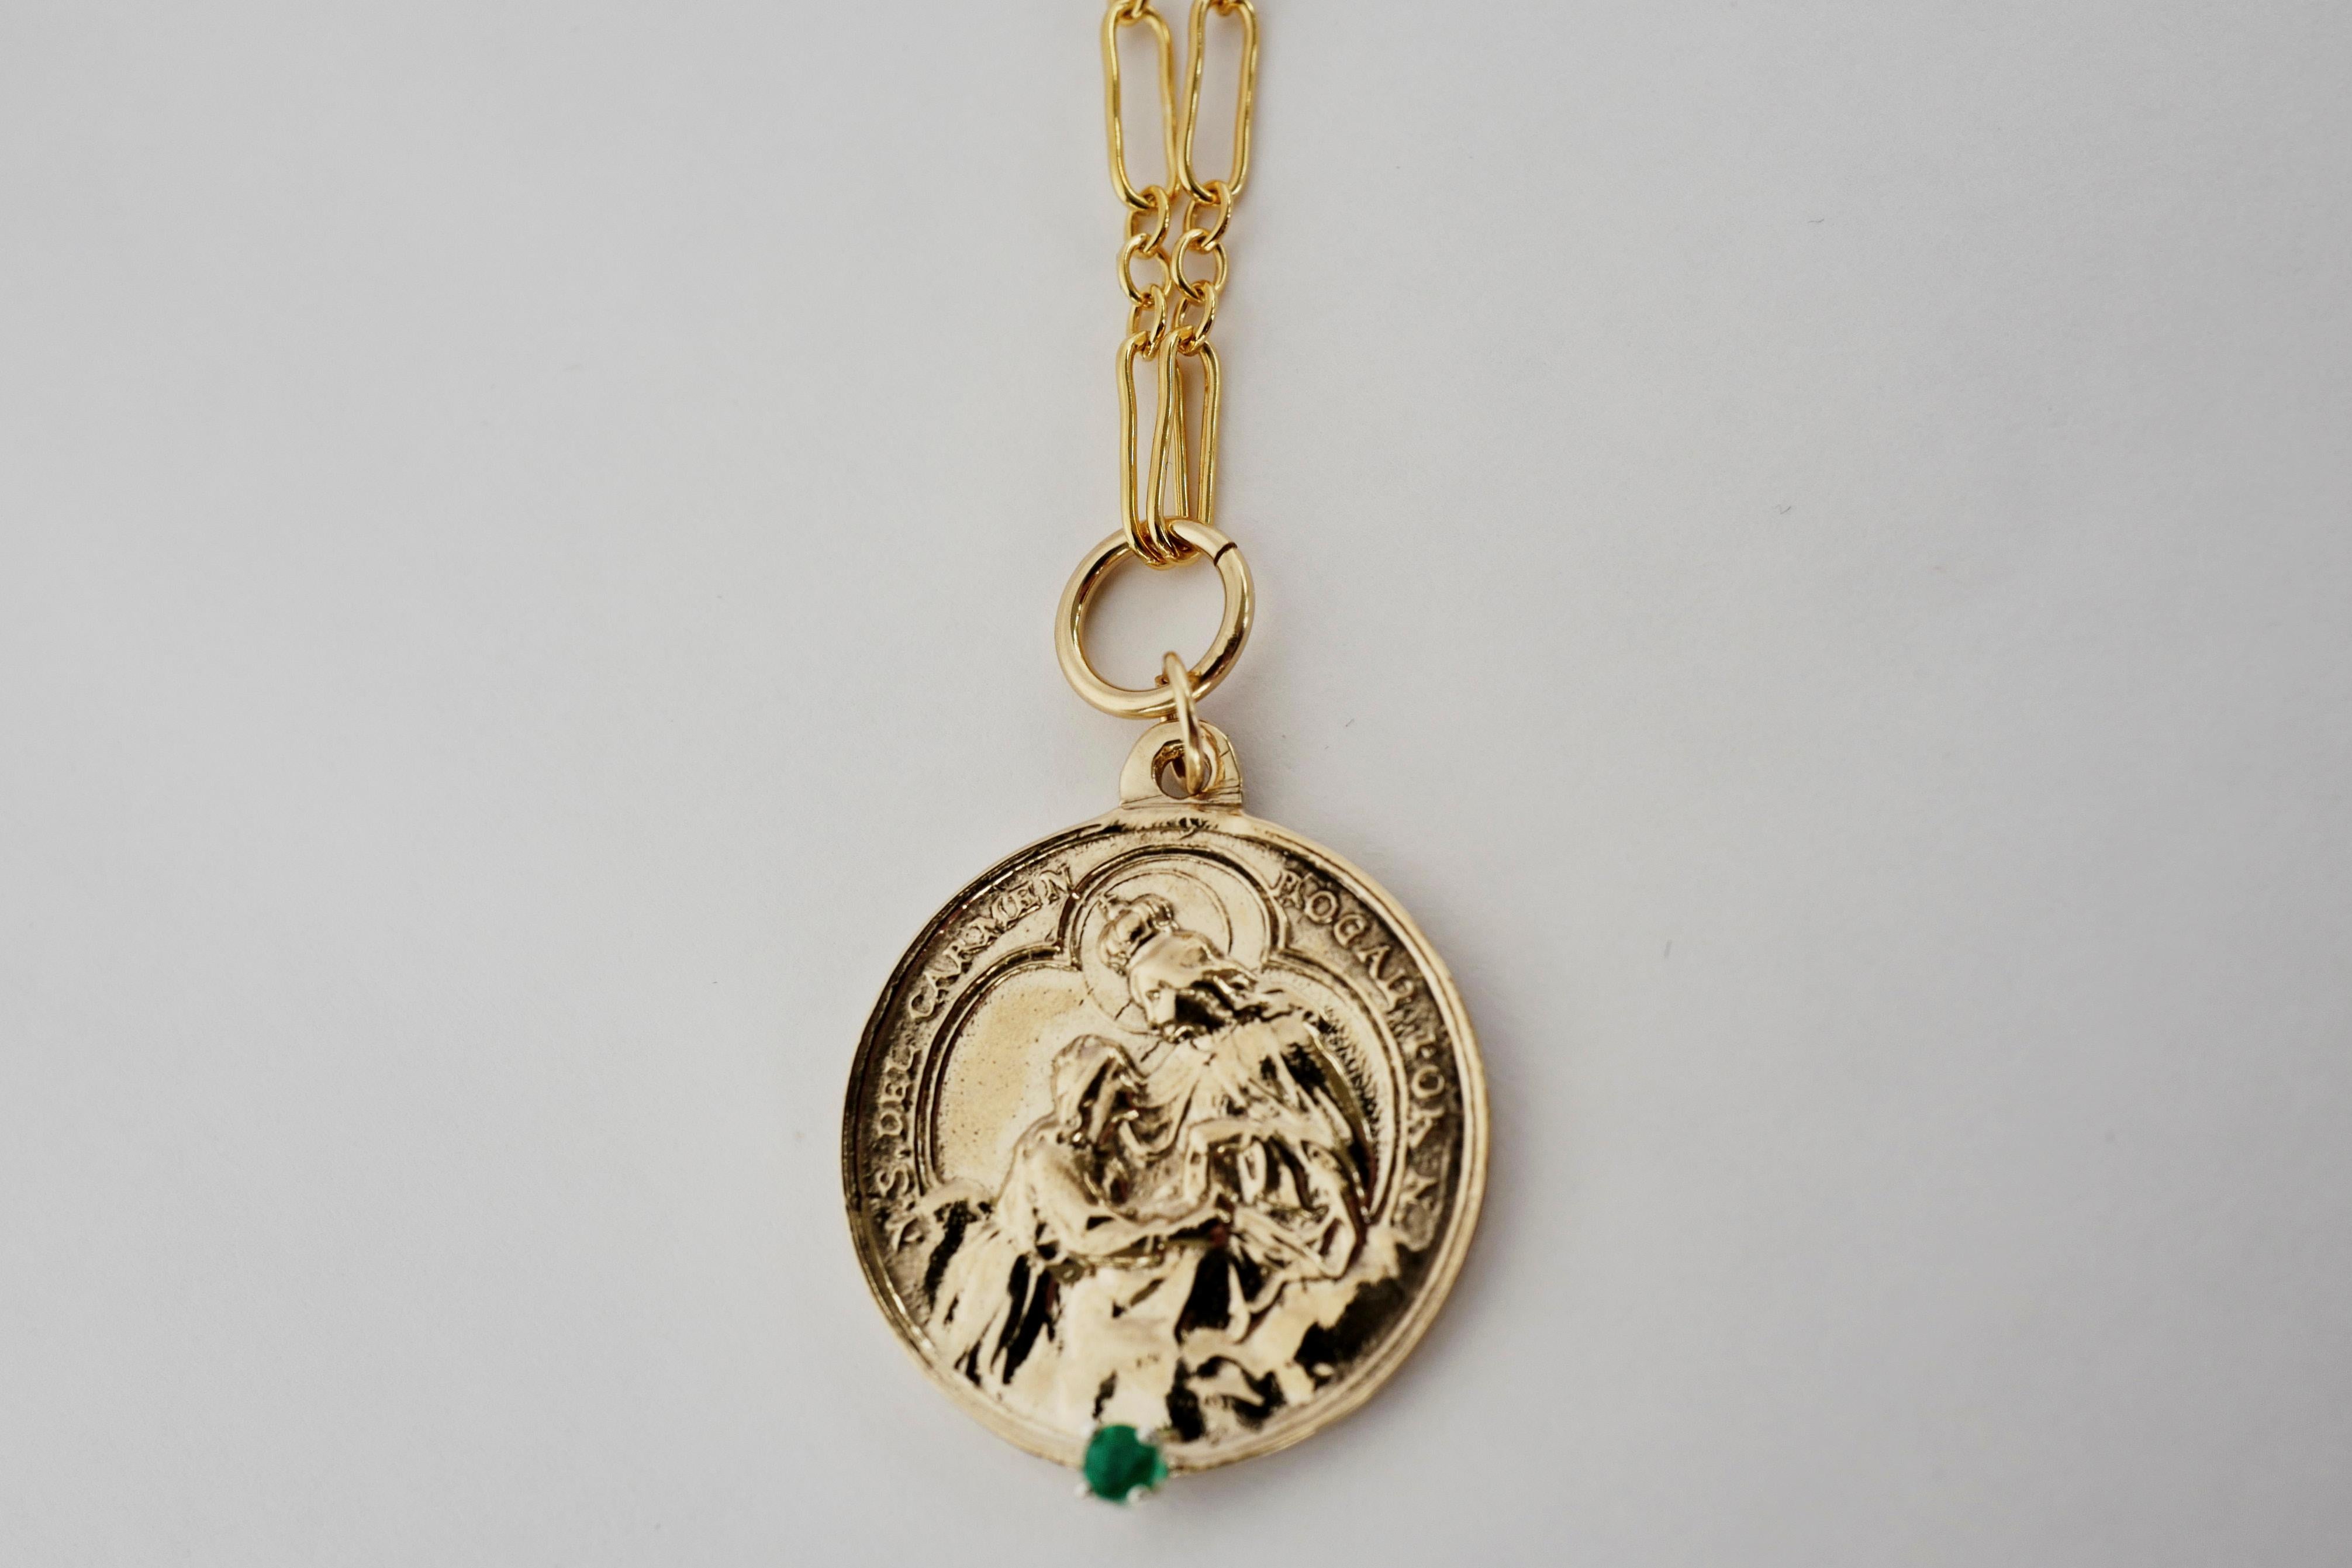 Emerald Virgin Mother Mary Medal Chunky Chain Necklace Gold tone J Dauphin In New Condition For Sale In Los Angeles, CA